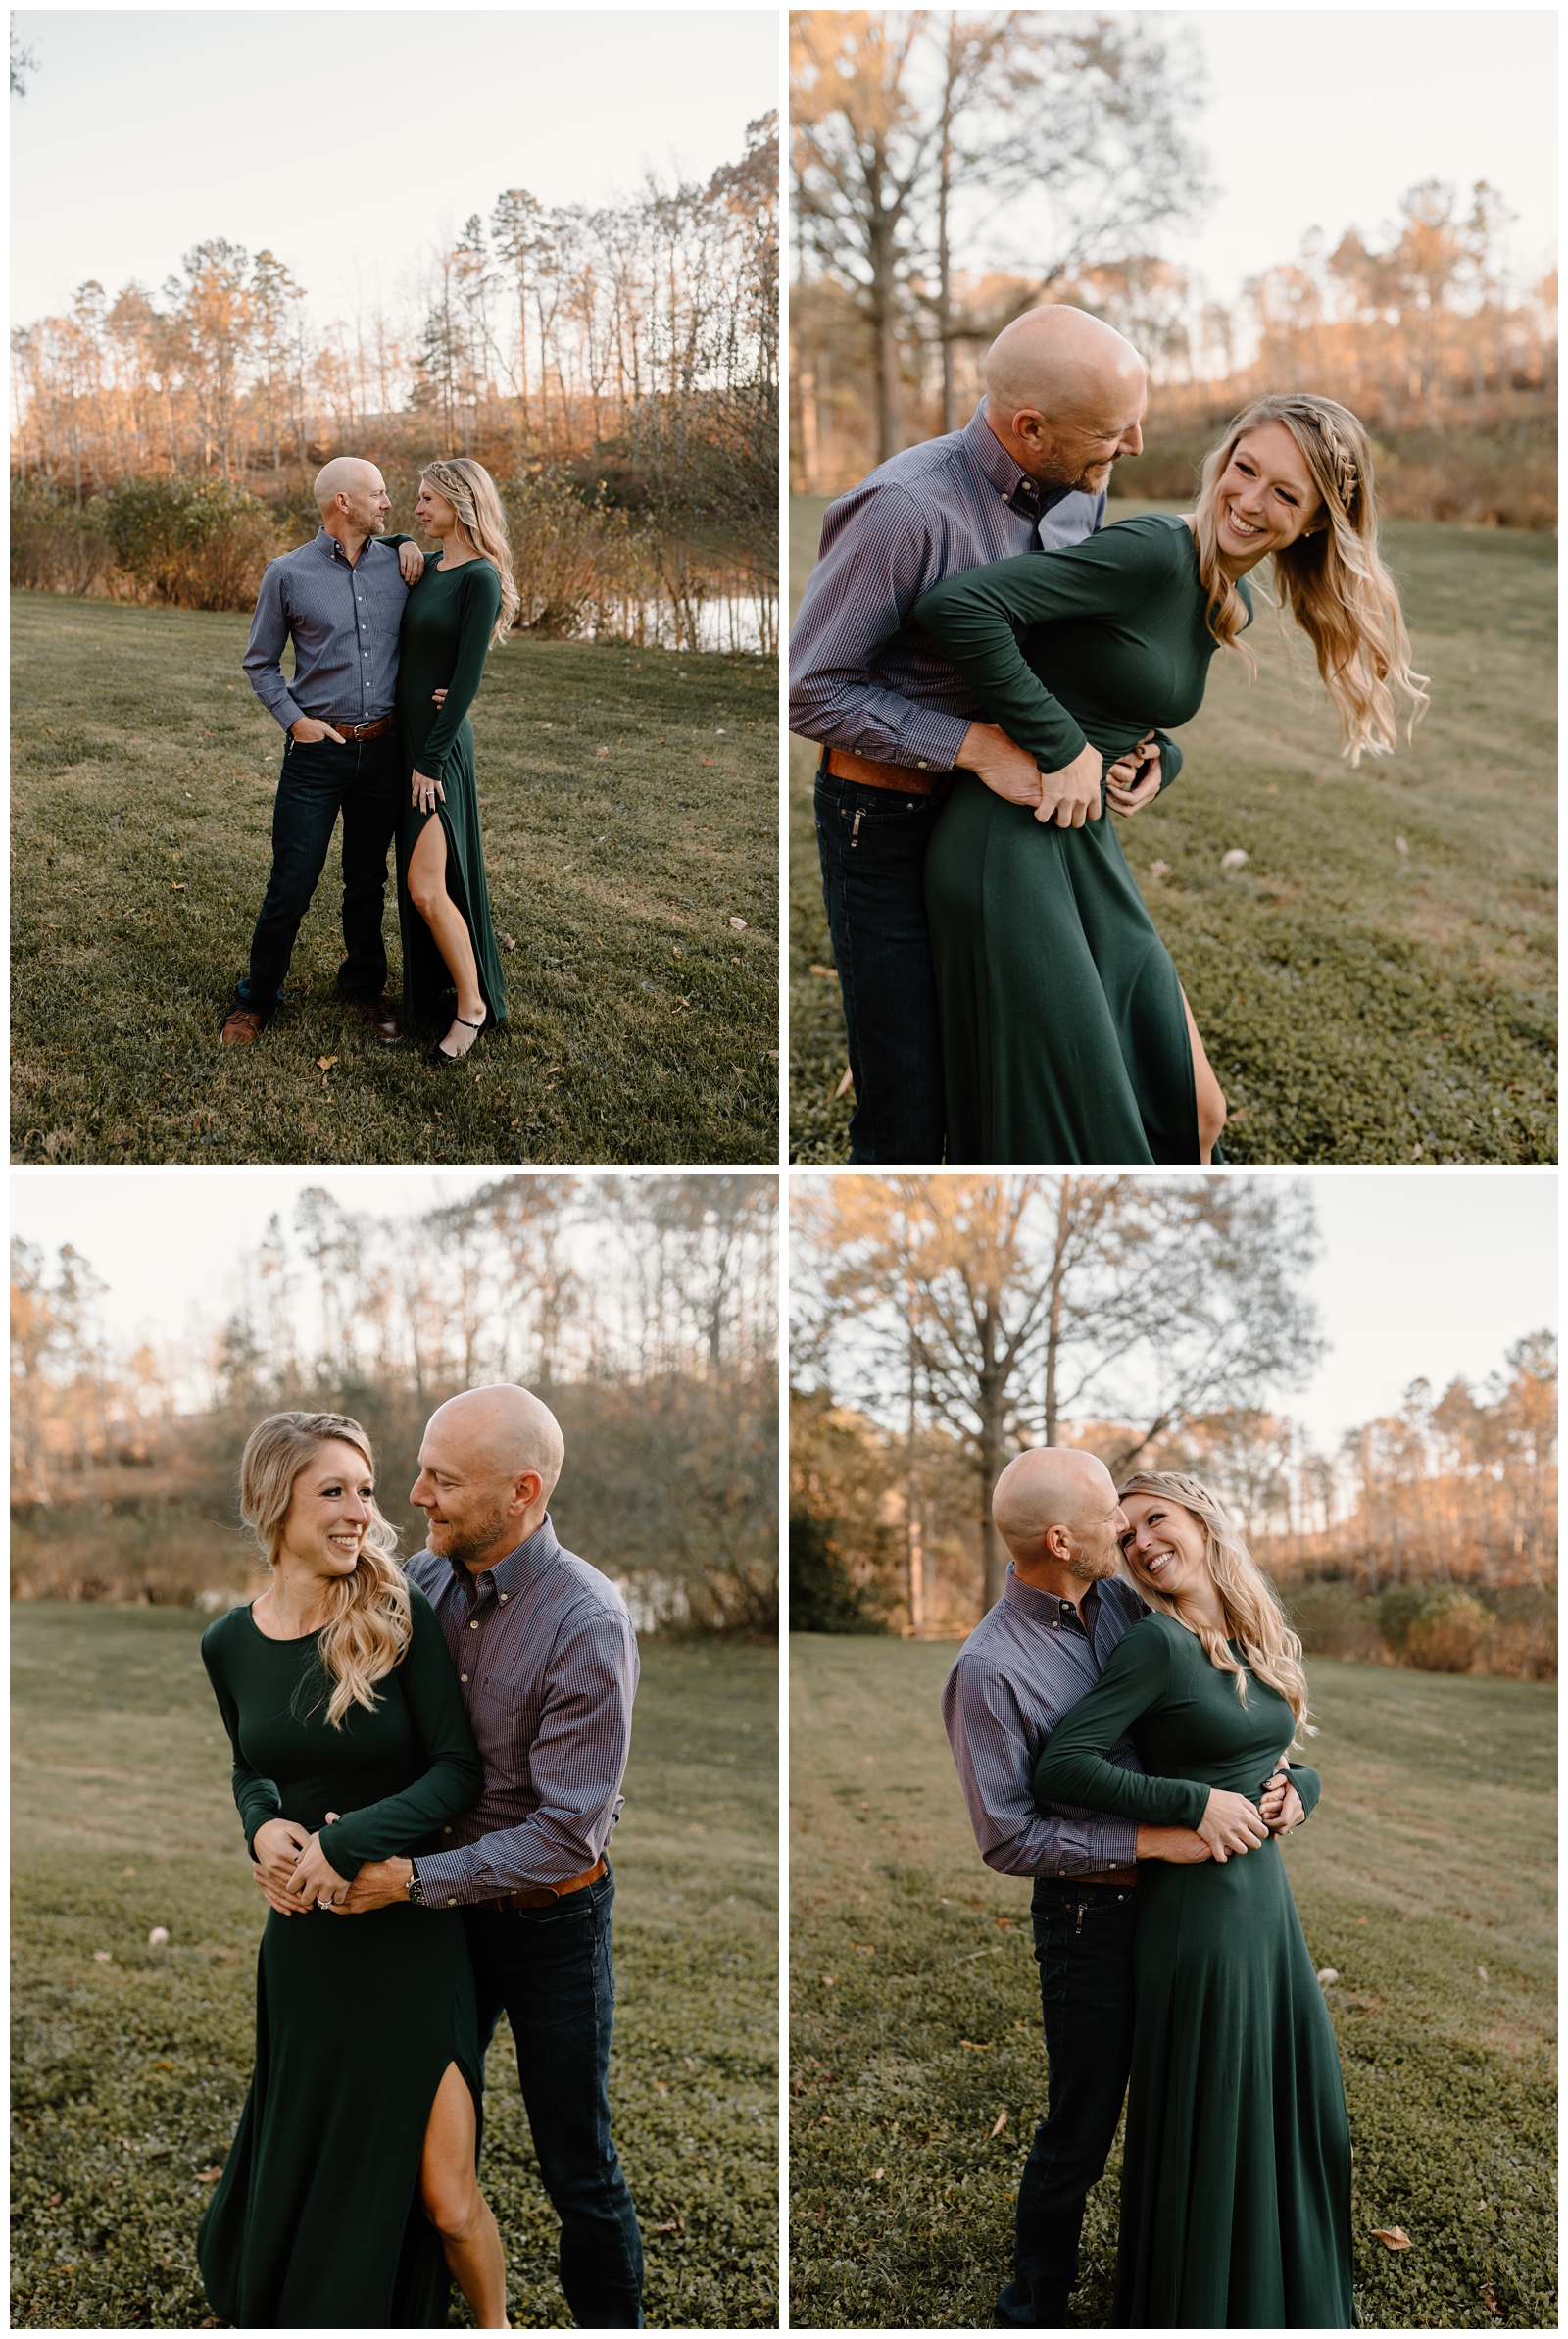 Fun engagement session in Greensboro by Raleigh NC wedding photographer